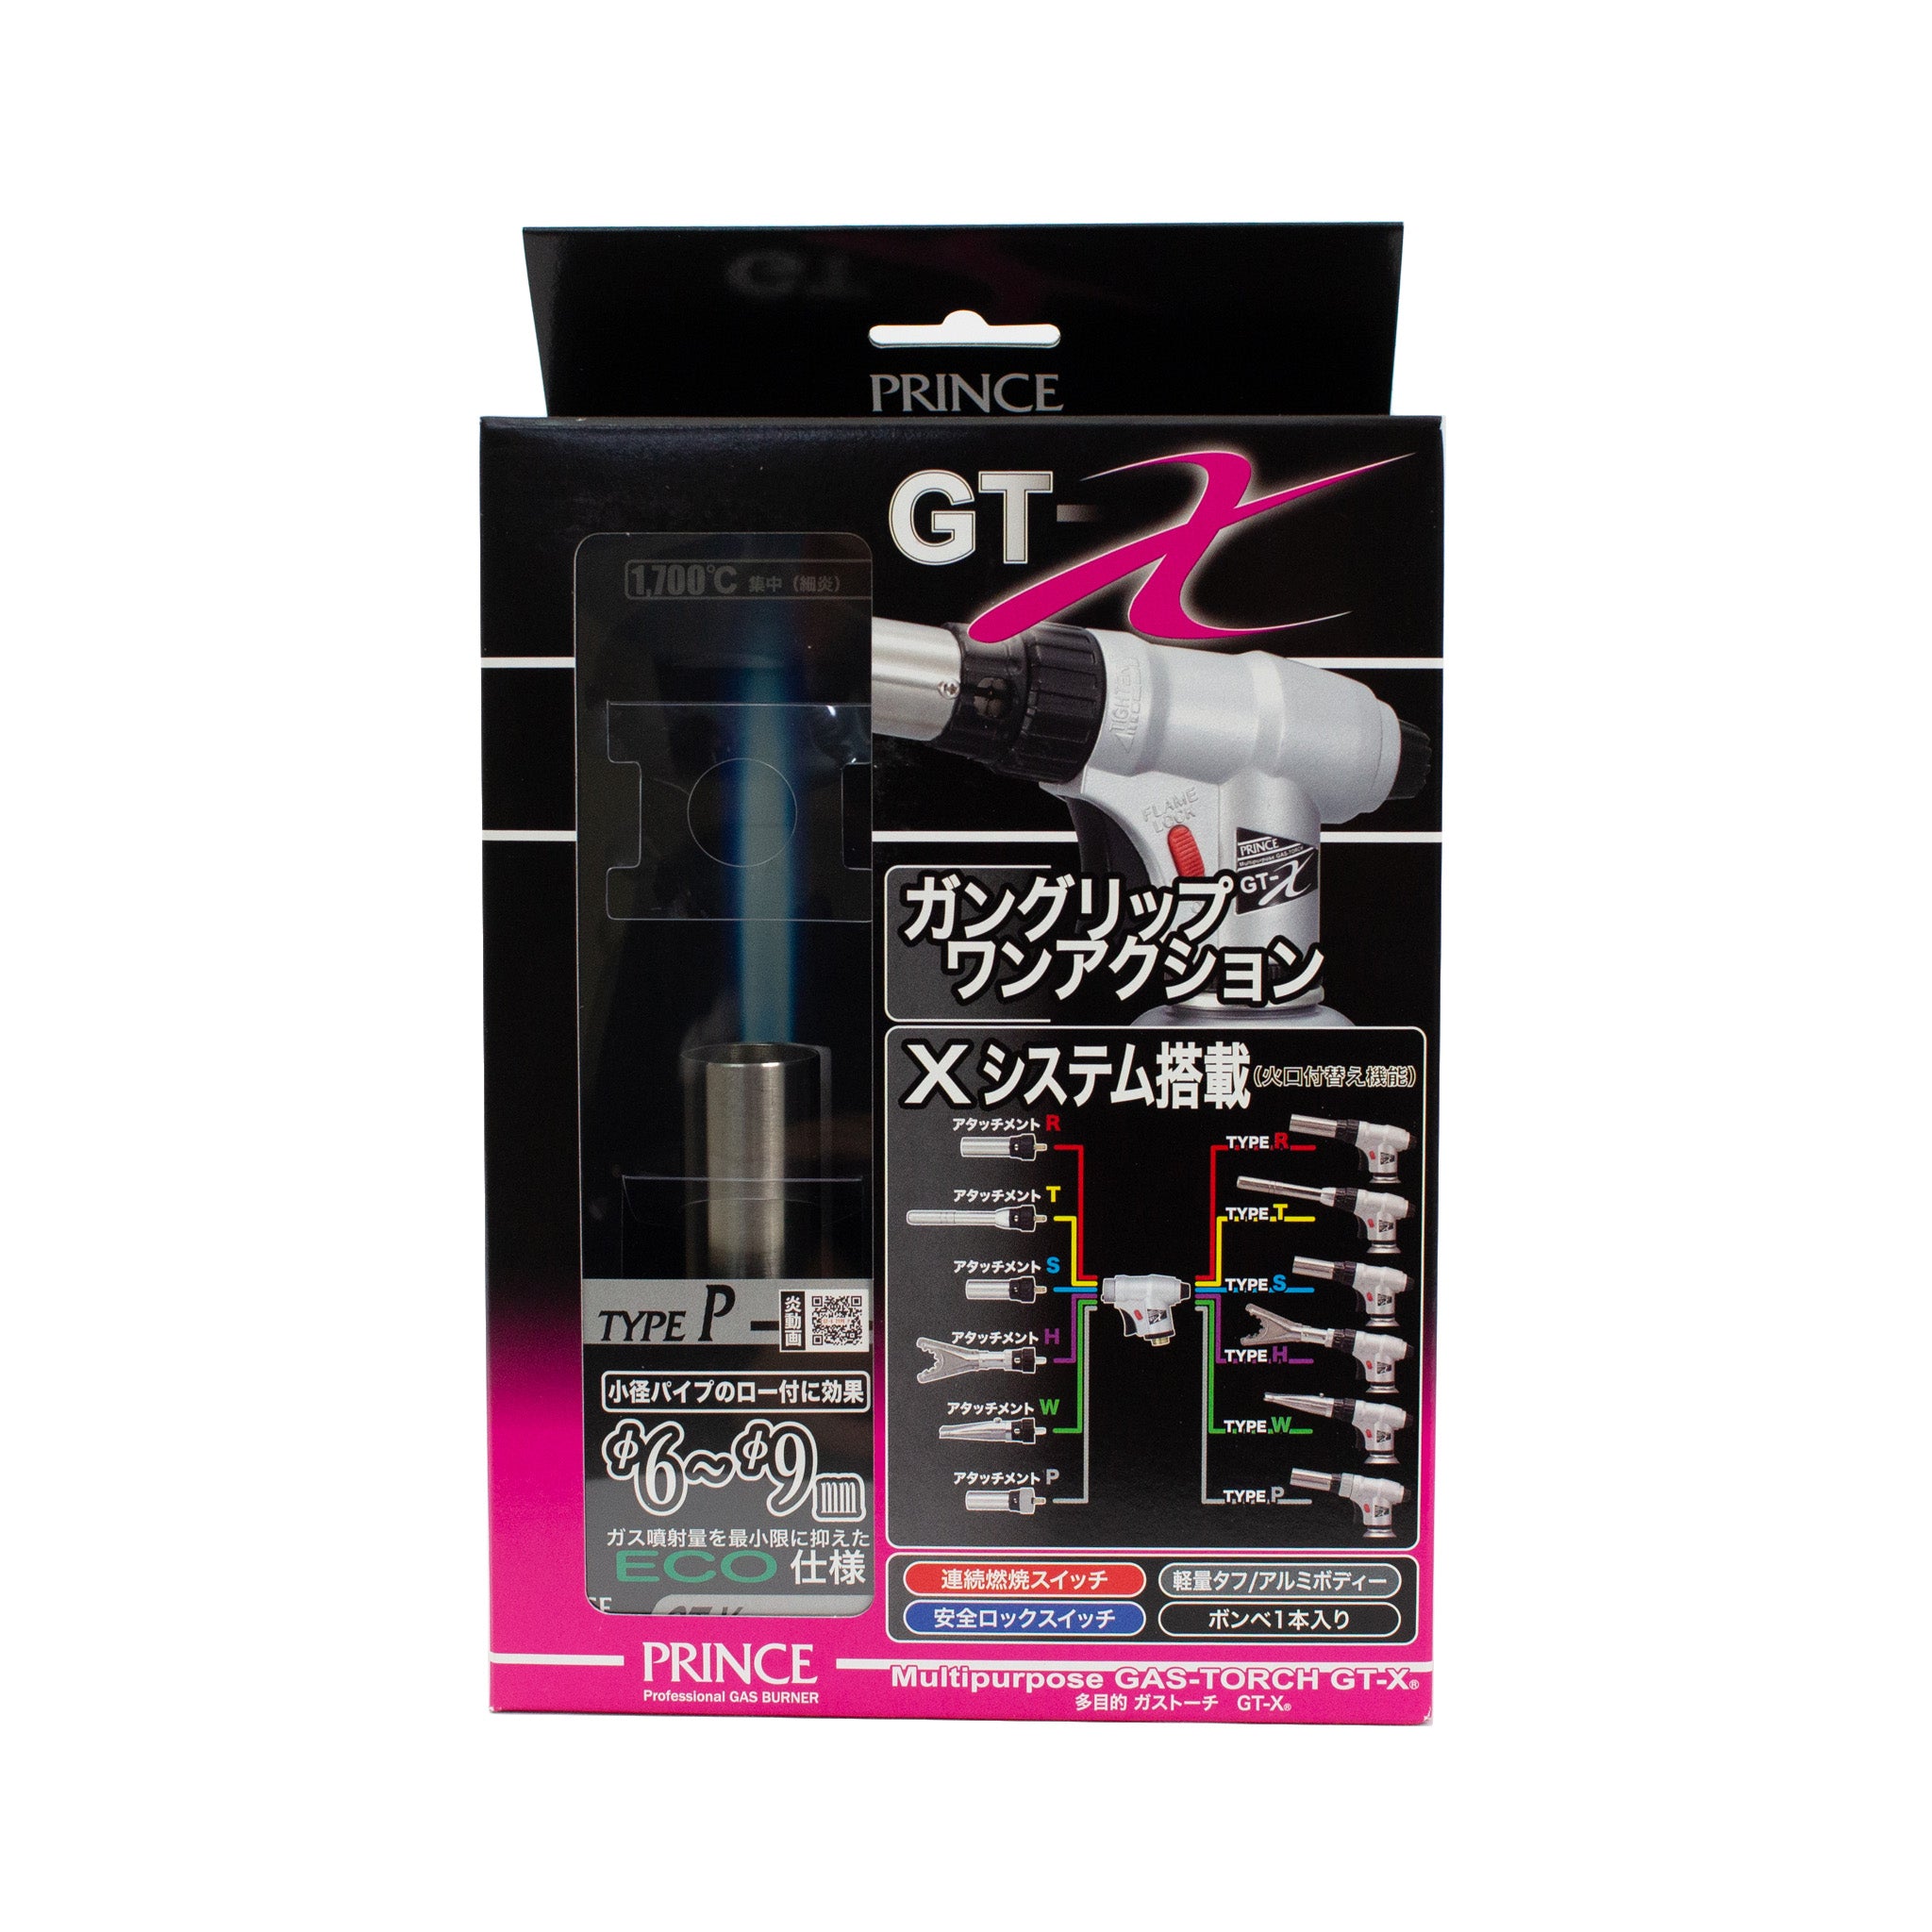 Prince Multipurpose Gas Torch GT-X Type R